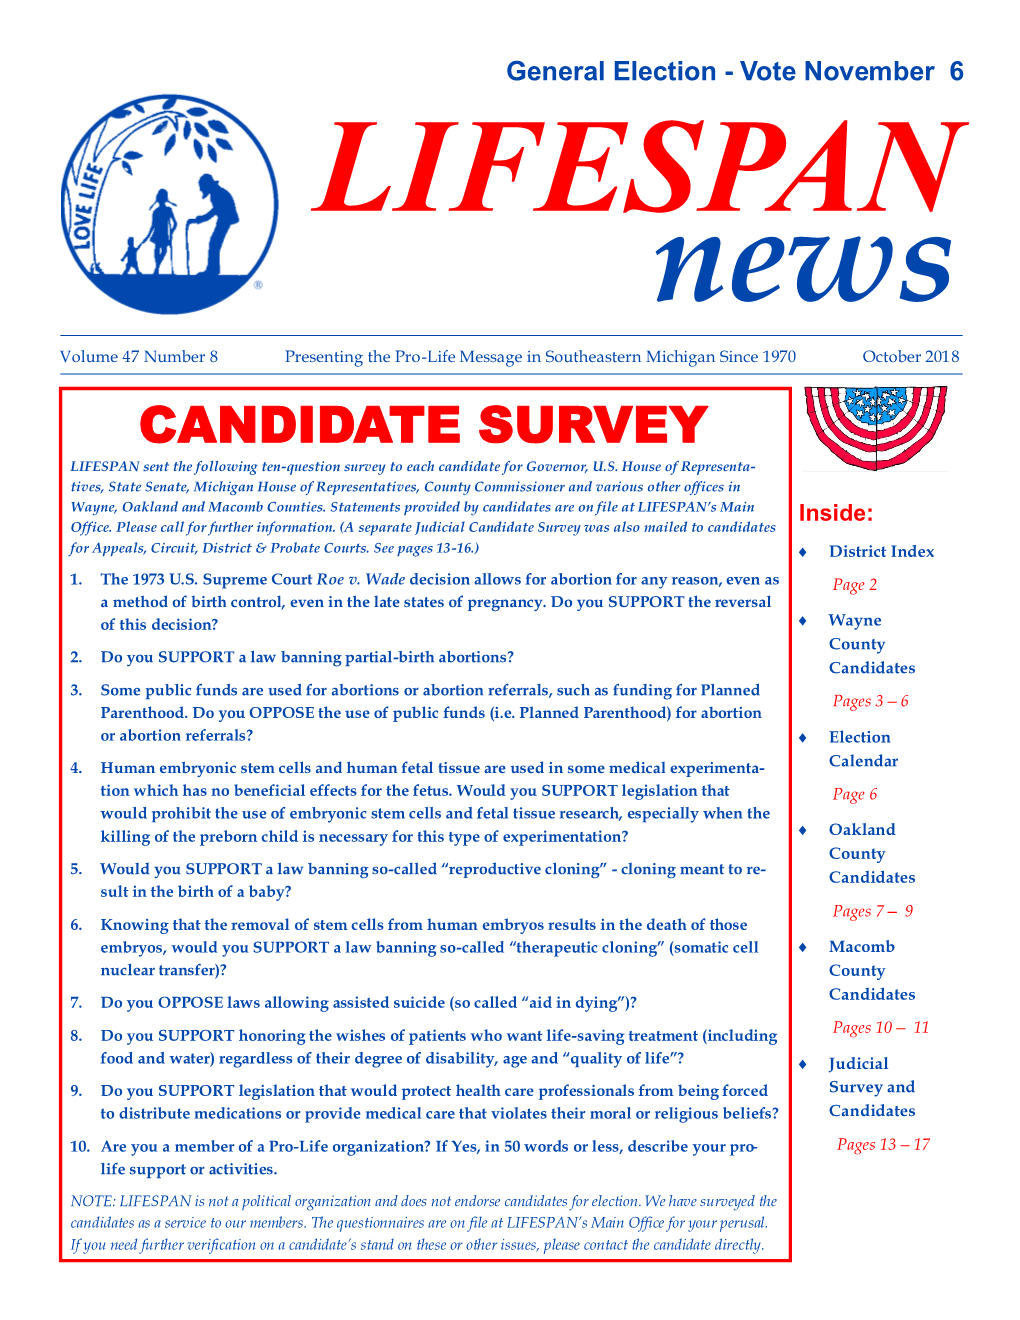 CANDIDATE SURVEY LIFESPAN Sent the Following Ten-Question Survey to Each Candidate for Governor, U.S